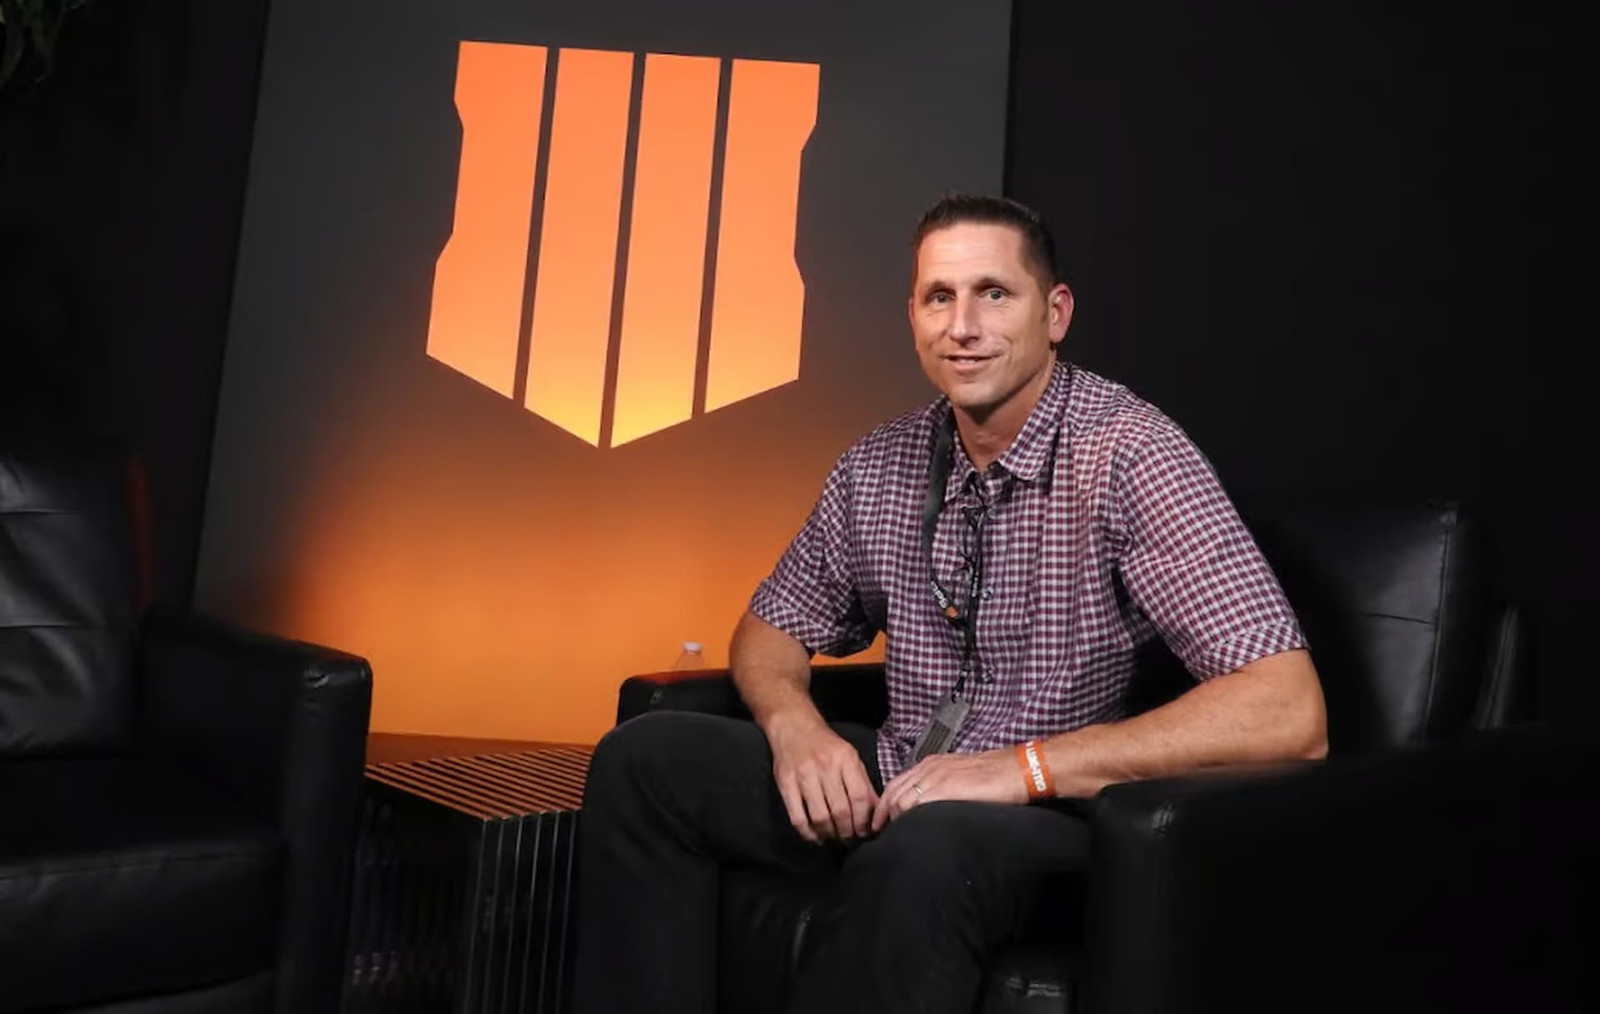 The plans for Call of Duty were revealed by Activision president Rob Kostich